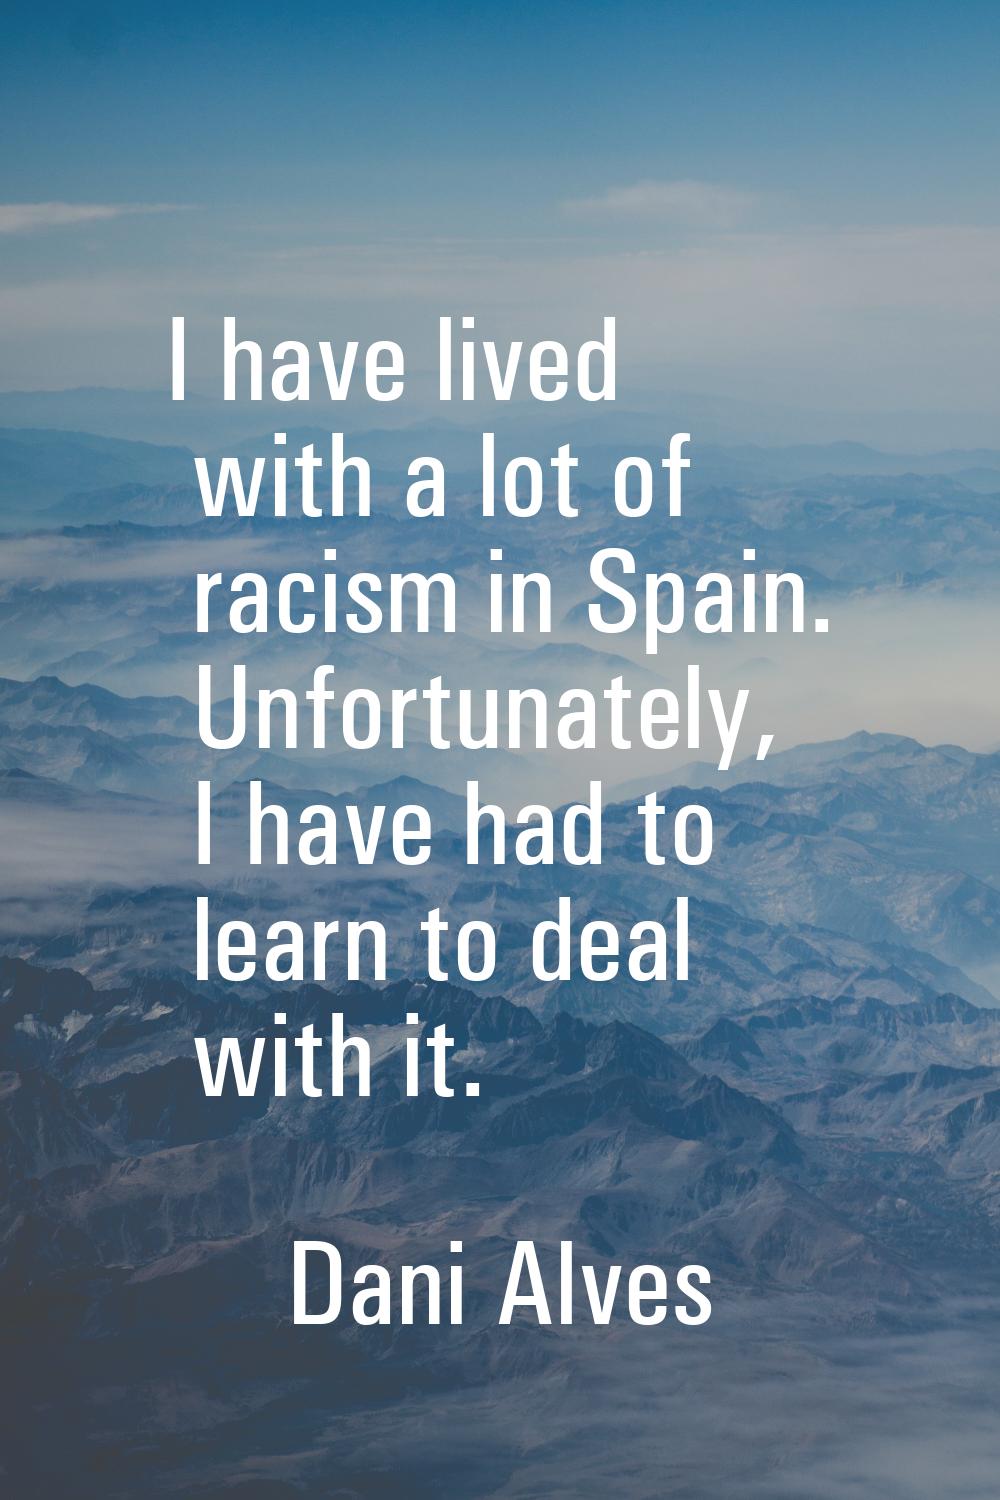 I have lived with a lot of racism in Spain. Unfortunately, I have had to learn to deal with it.